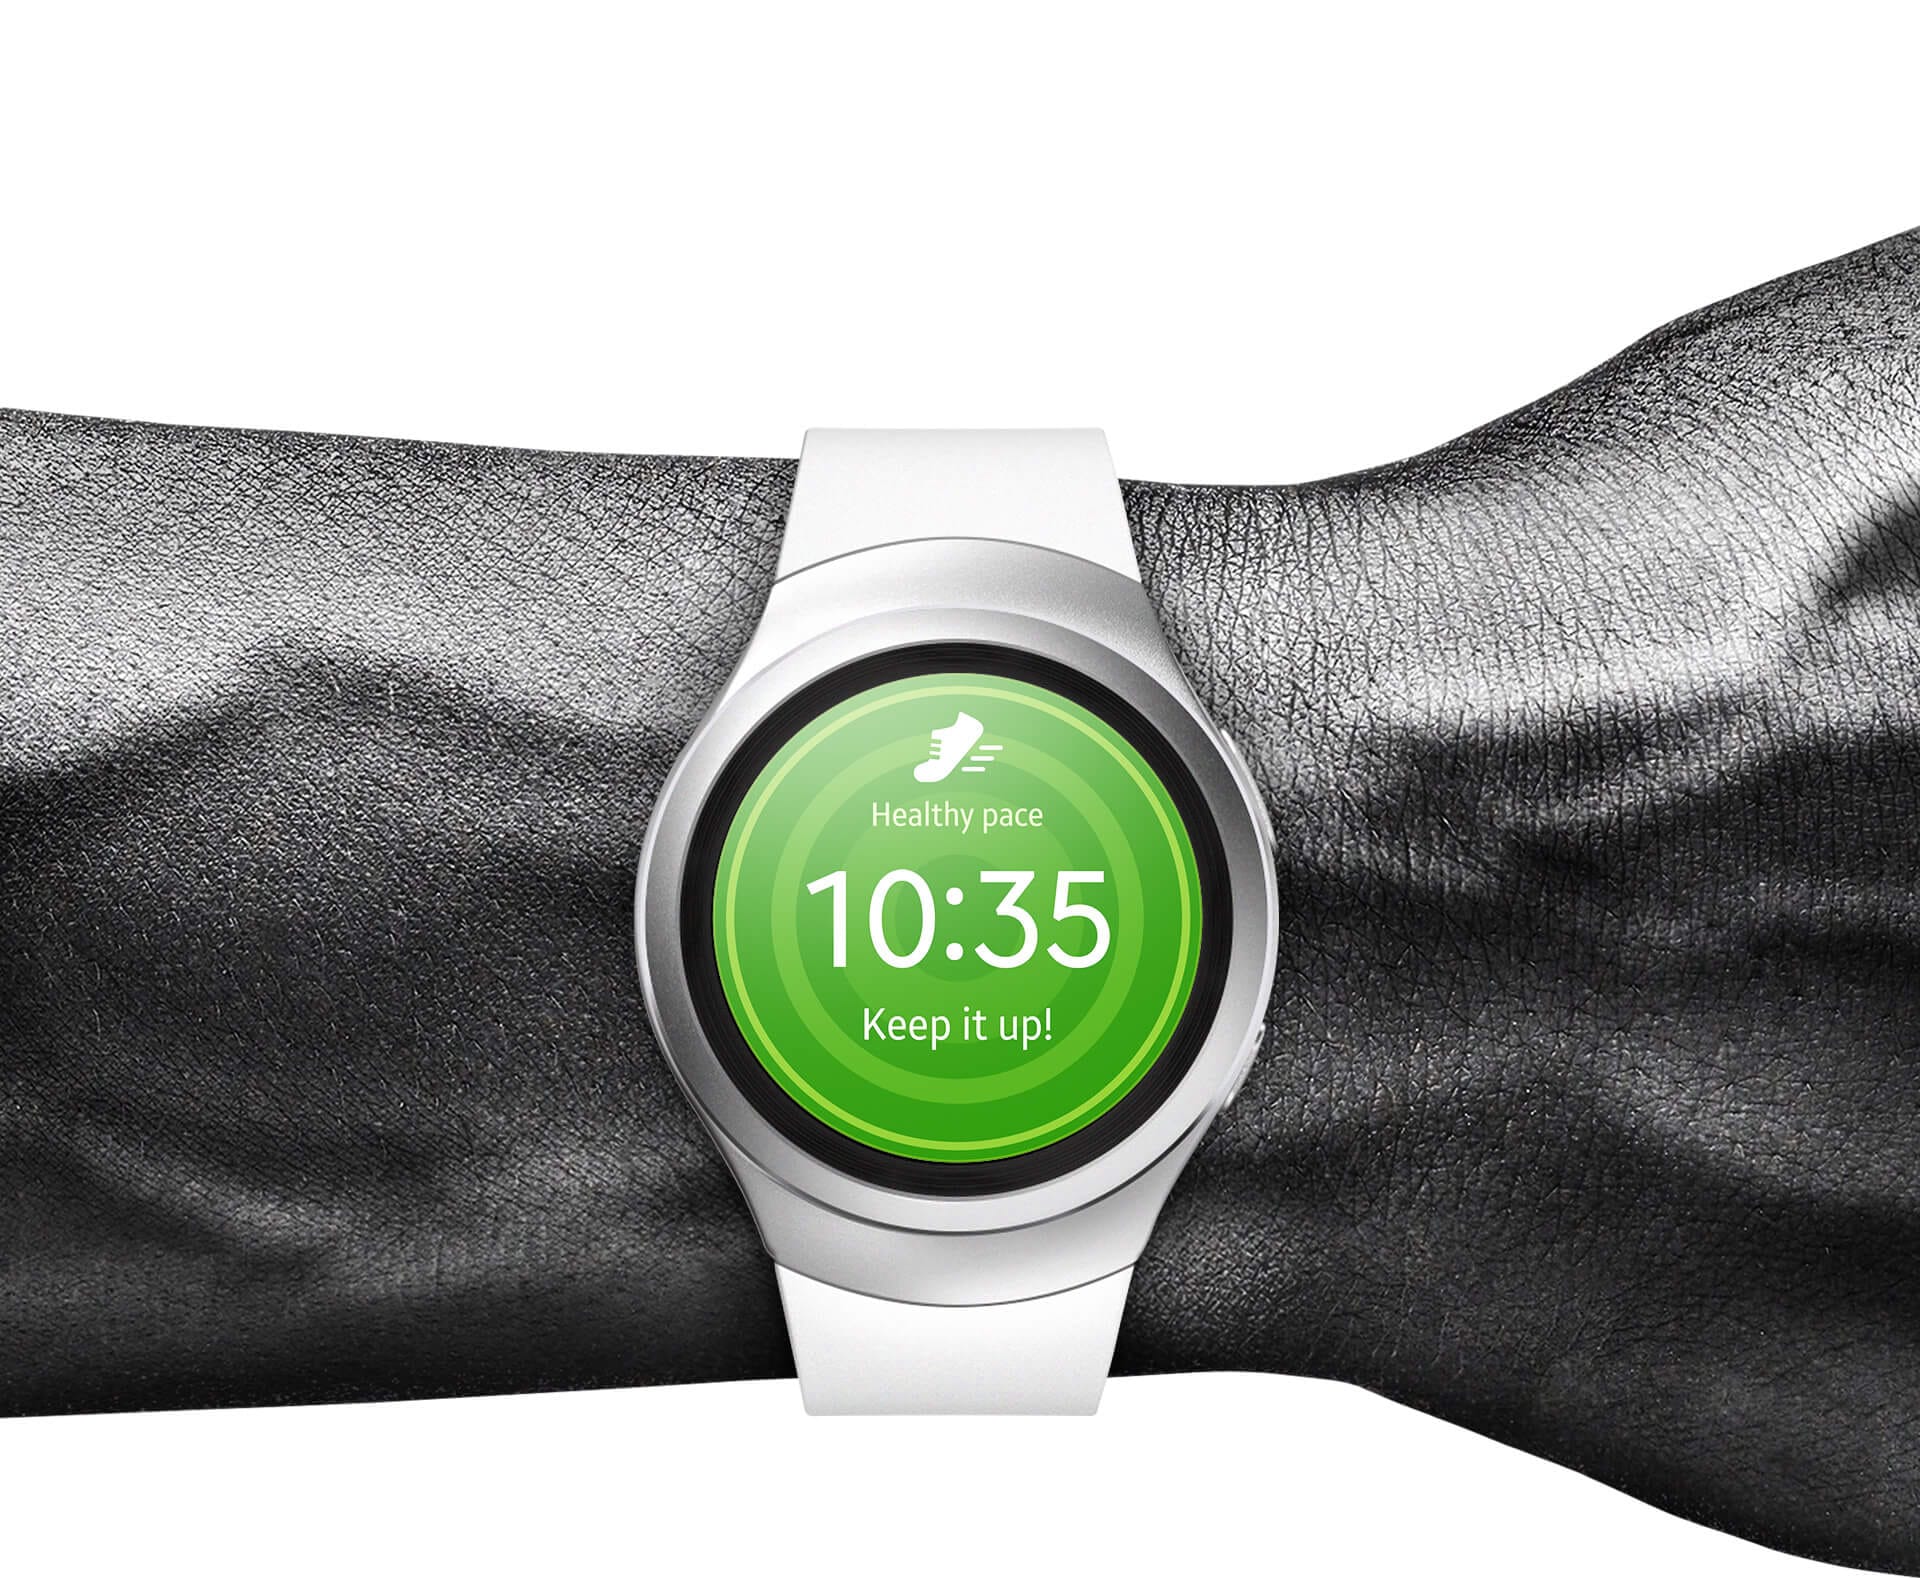 Samsung Gear S2 - Is it a fitness tracker too? - YouTube